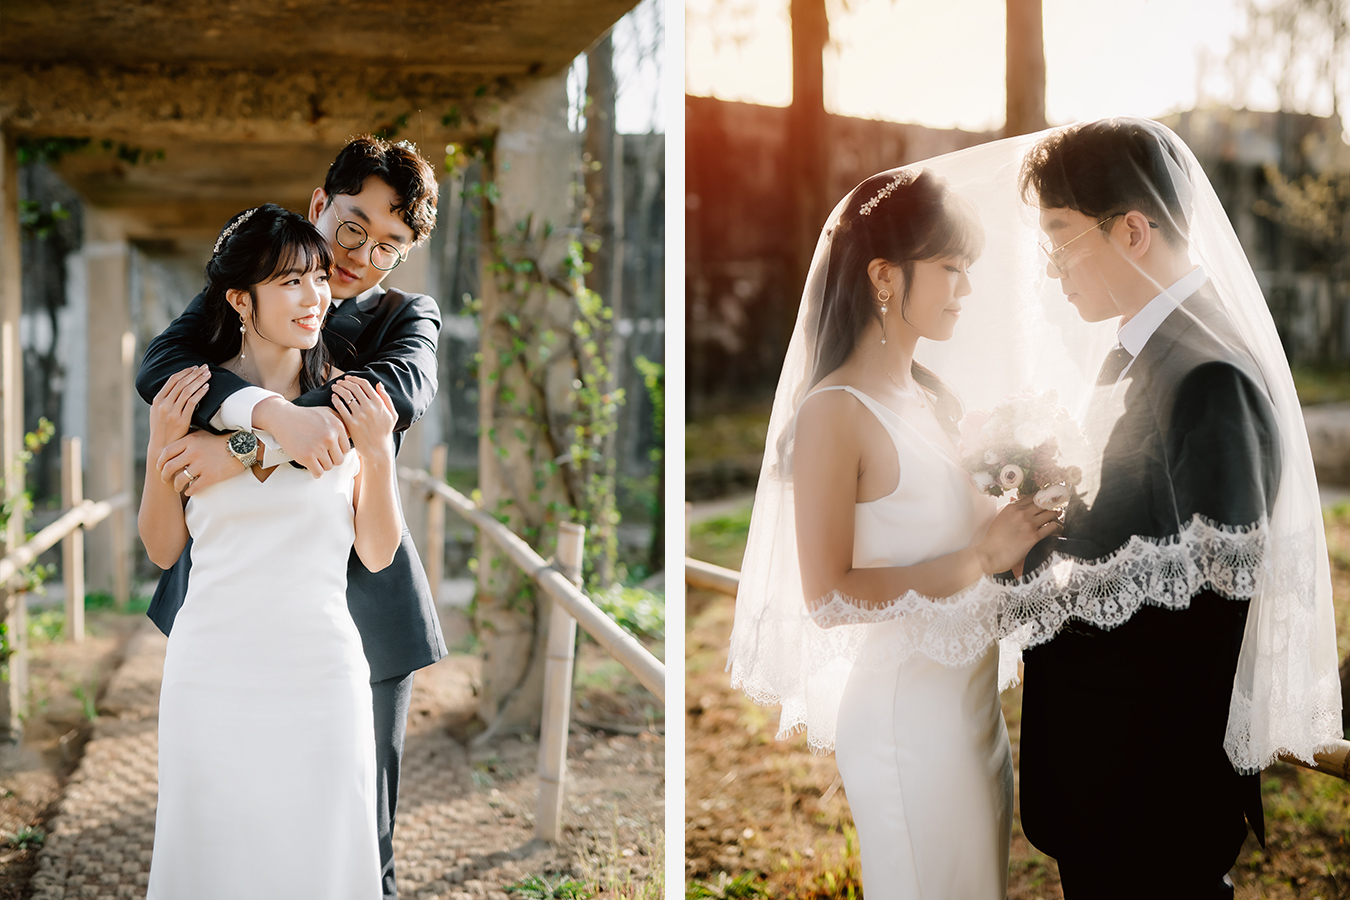 Cute Korea Pre-Wedding Photoshoot Under the Cherry Blossoms Trees by Jungyeol on OneThreeOneFour 12